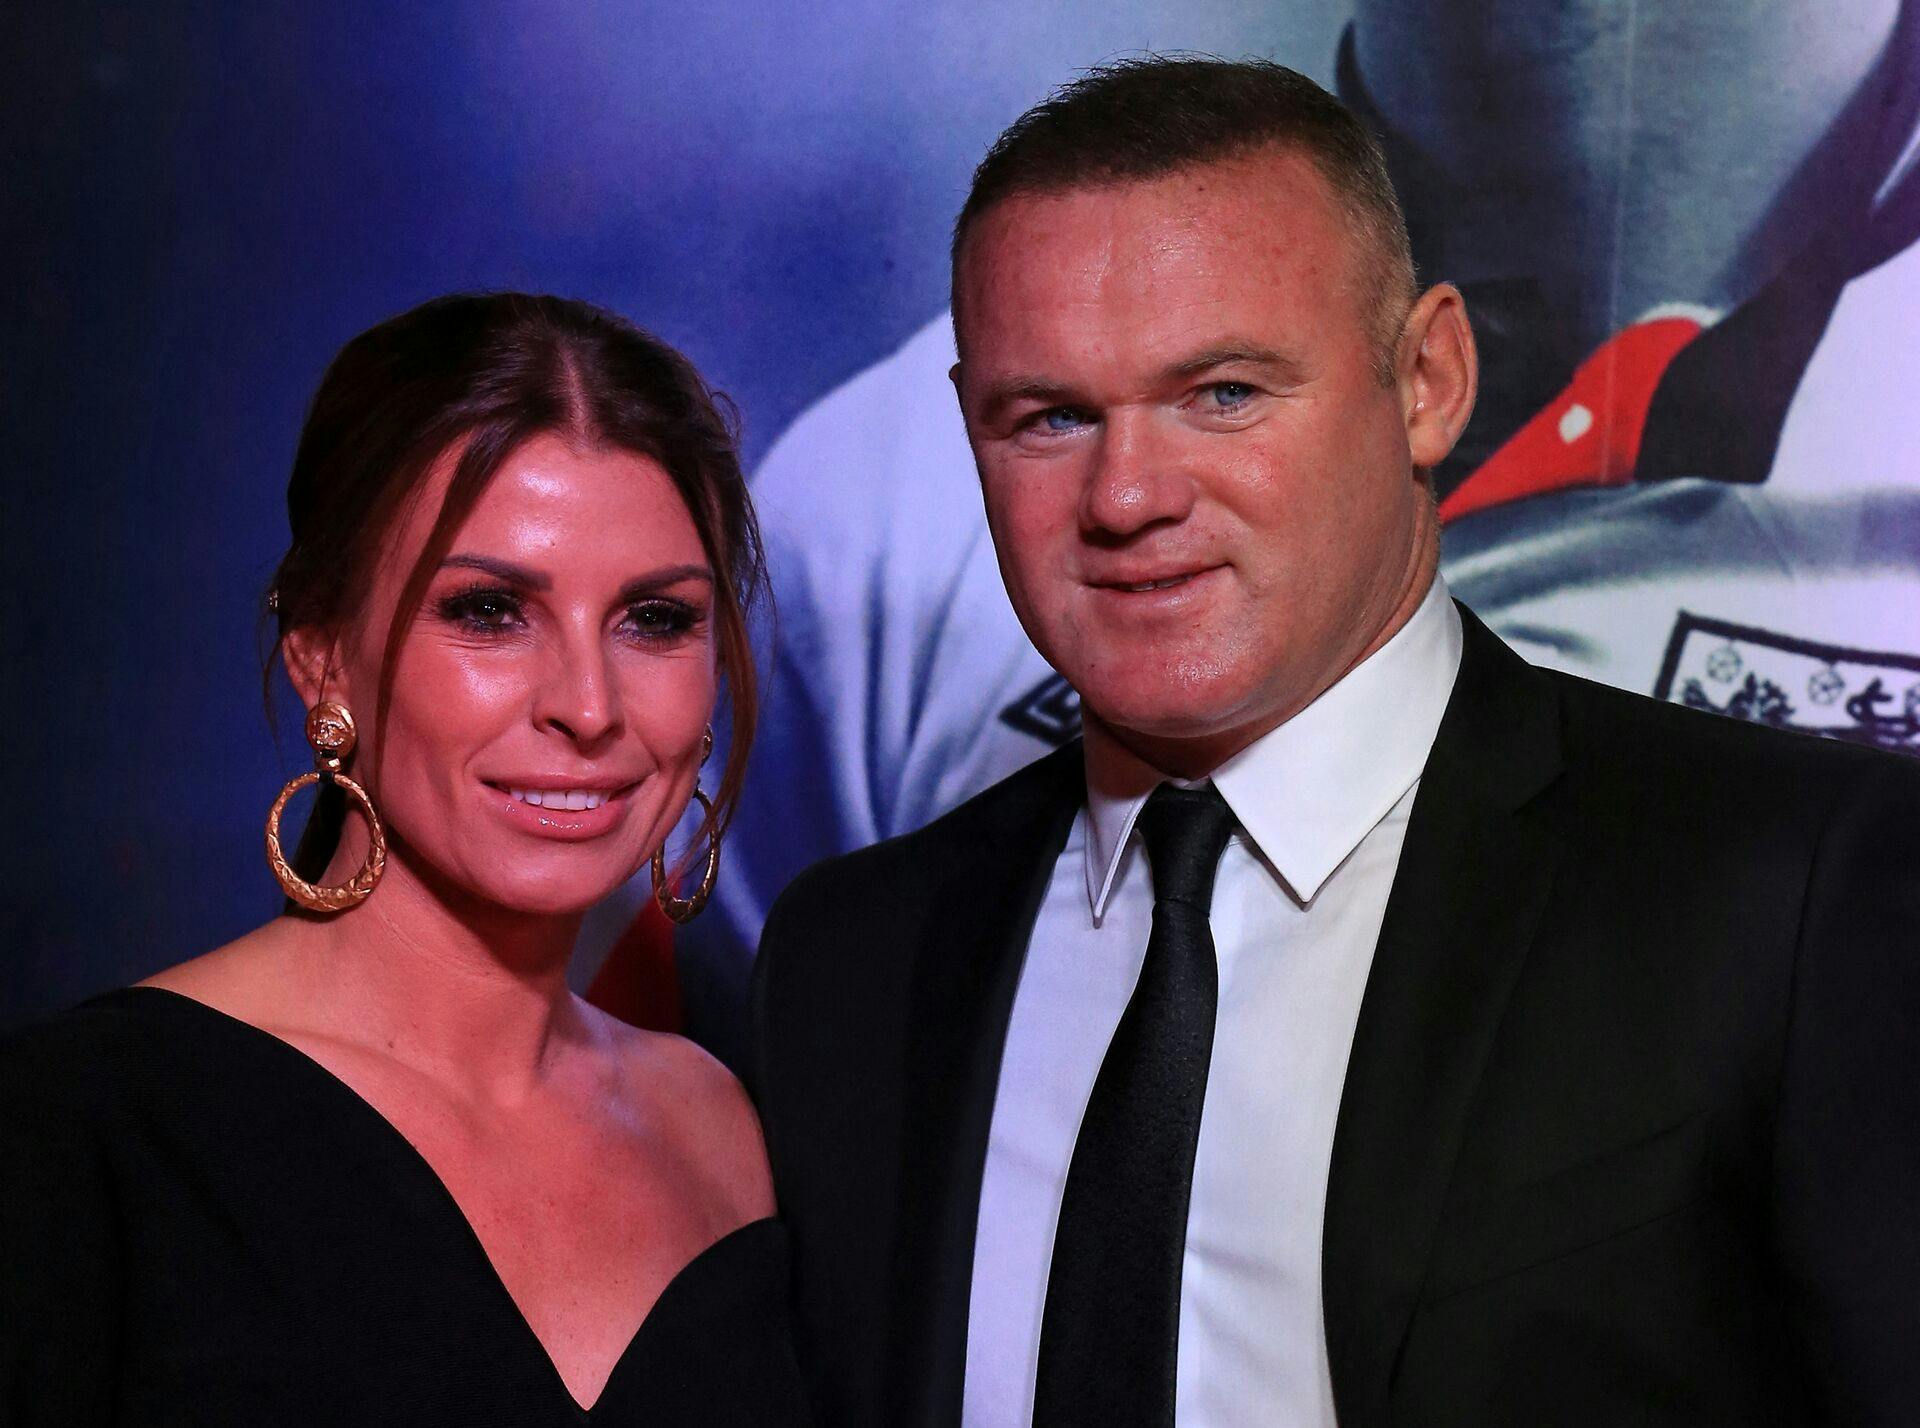 Former Manchester United and England footballer Wayne Rooney and his wife Coleen pose upon arrival to attend the World Premiere of ROBBO: The Bryan Robson Story, in Manchester, northern England on November 25, 2021. Lindsey Parnaby / AFP